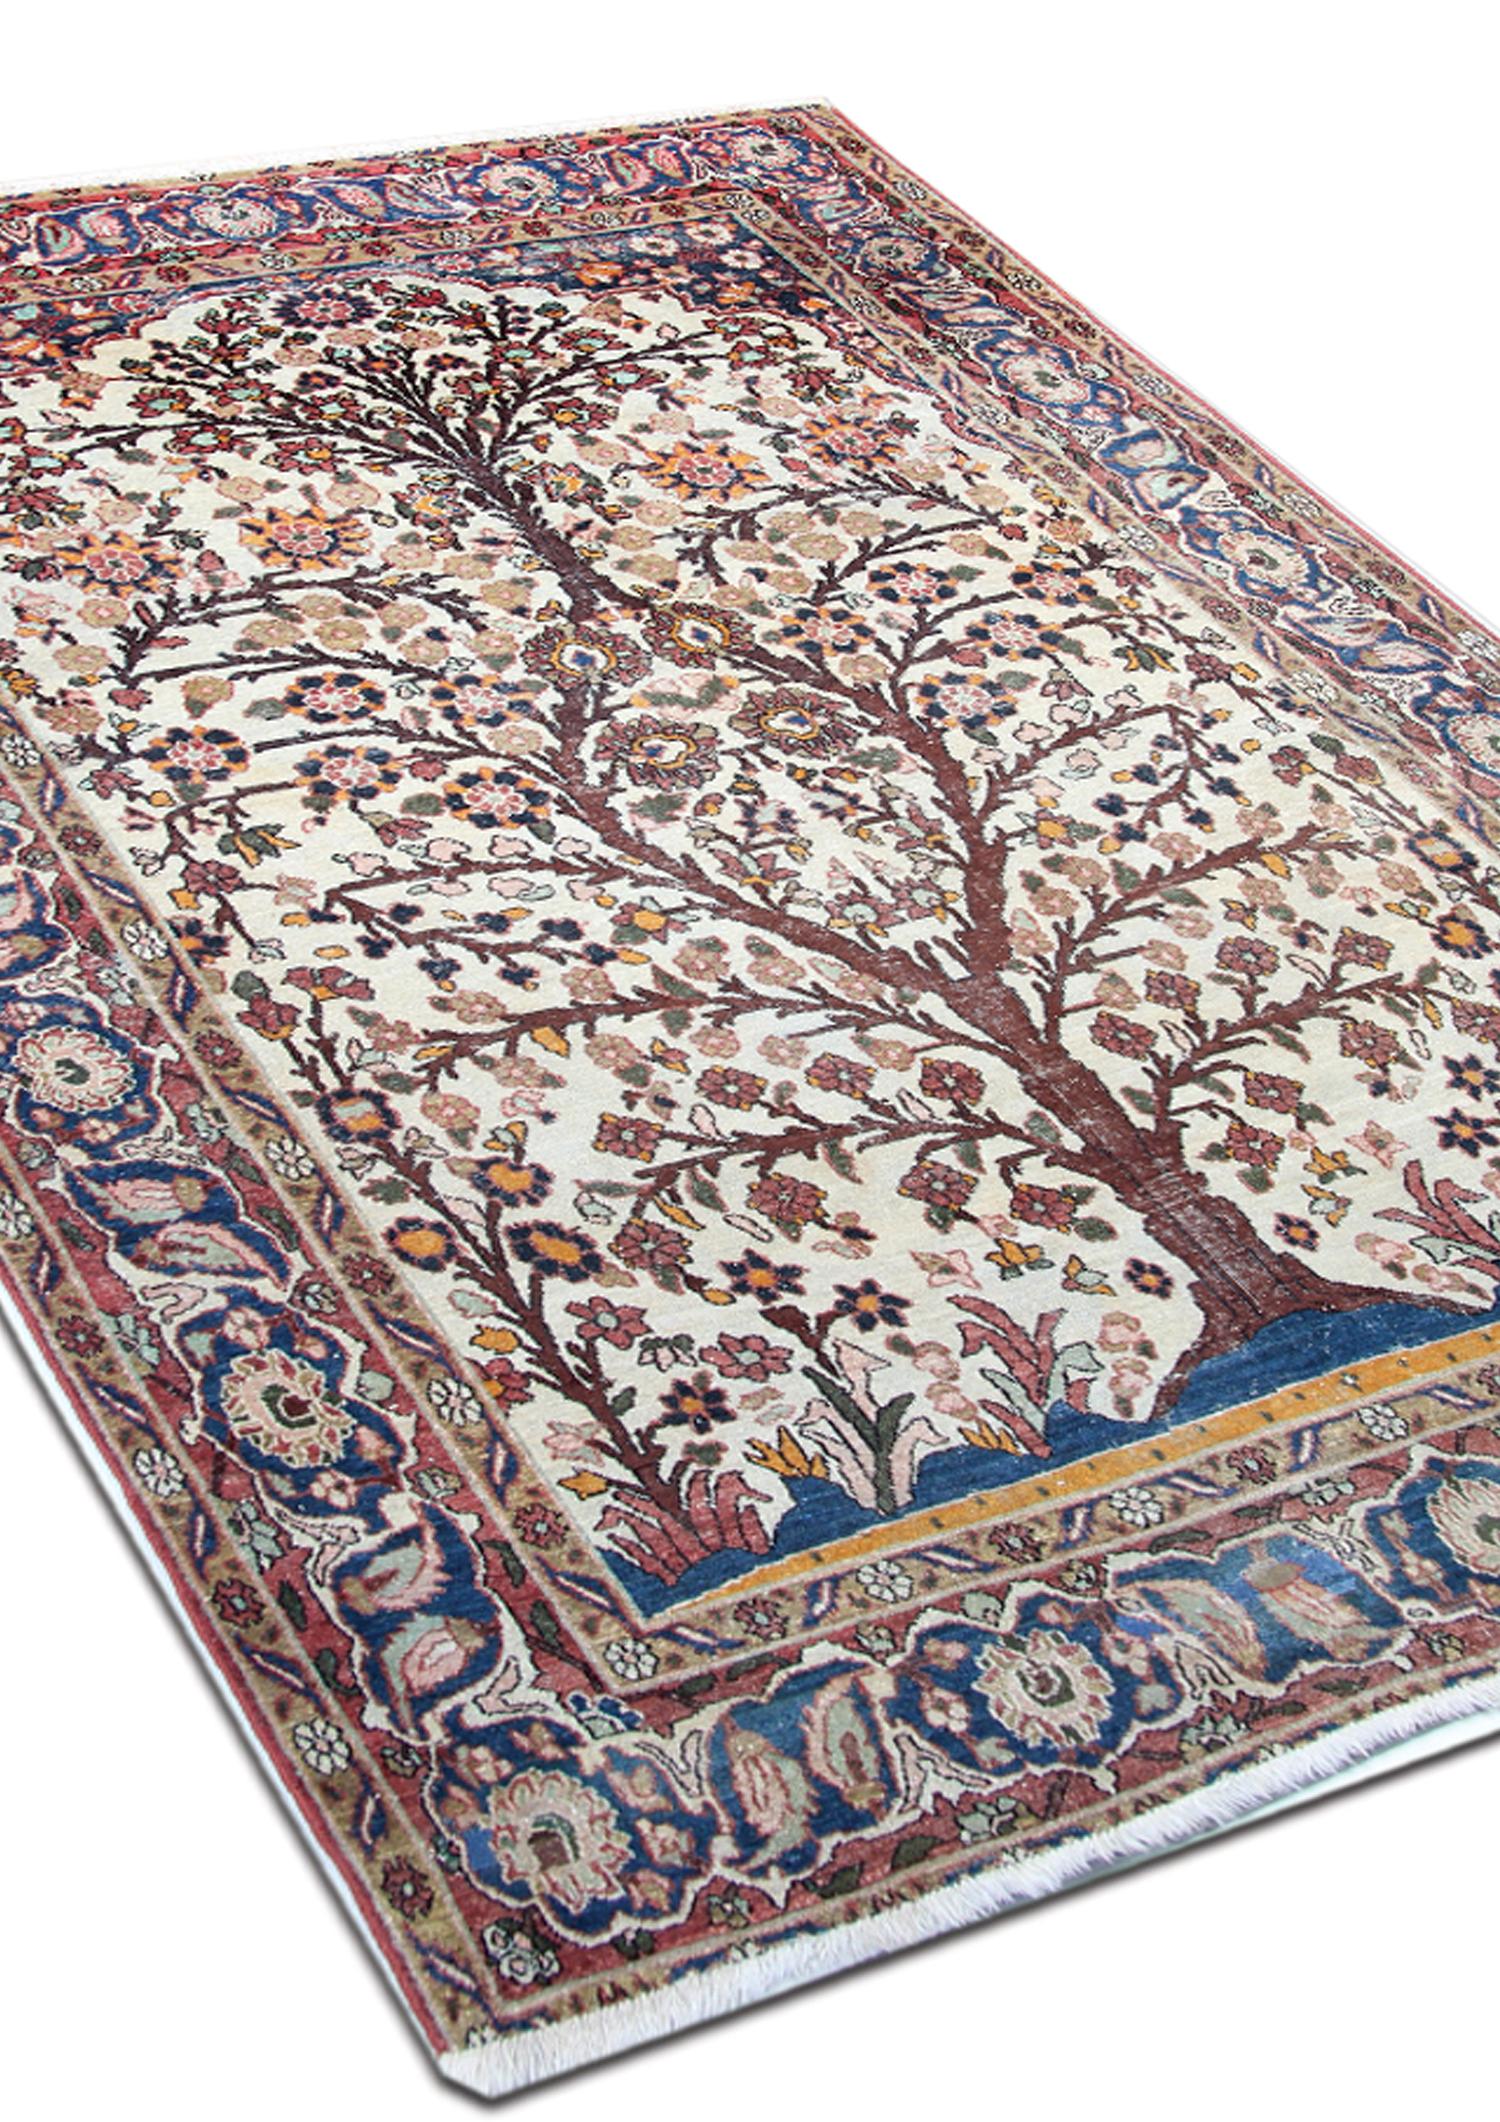 An extraordinary early 20th-century Ivory rug with an incredible densely woven multi-coloured tree-of-life design with two sinuous trees on each side of the central field, each with myriad varieties of multicoloured flowers and leaves. The border is